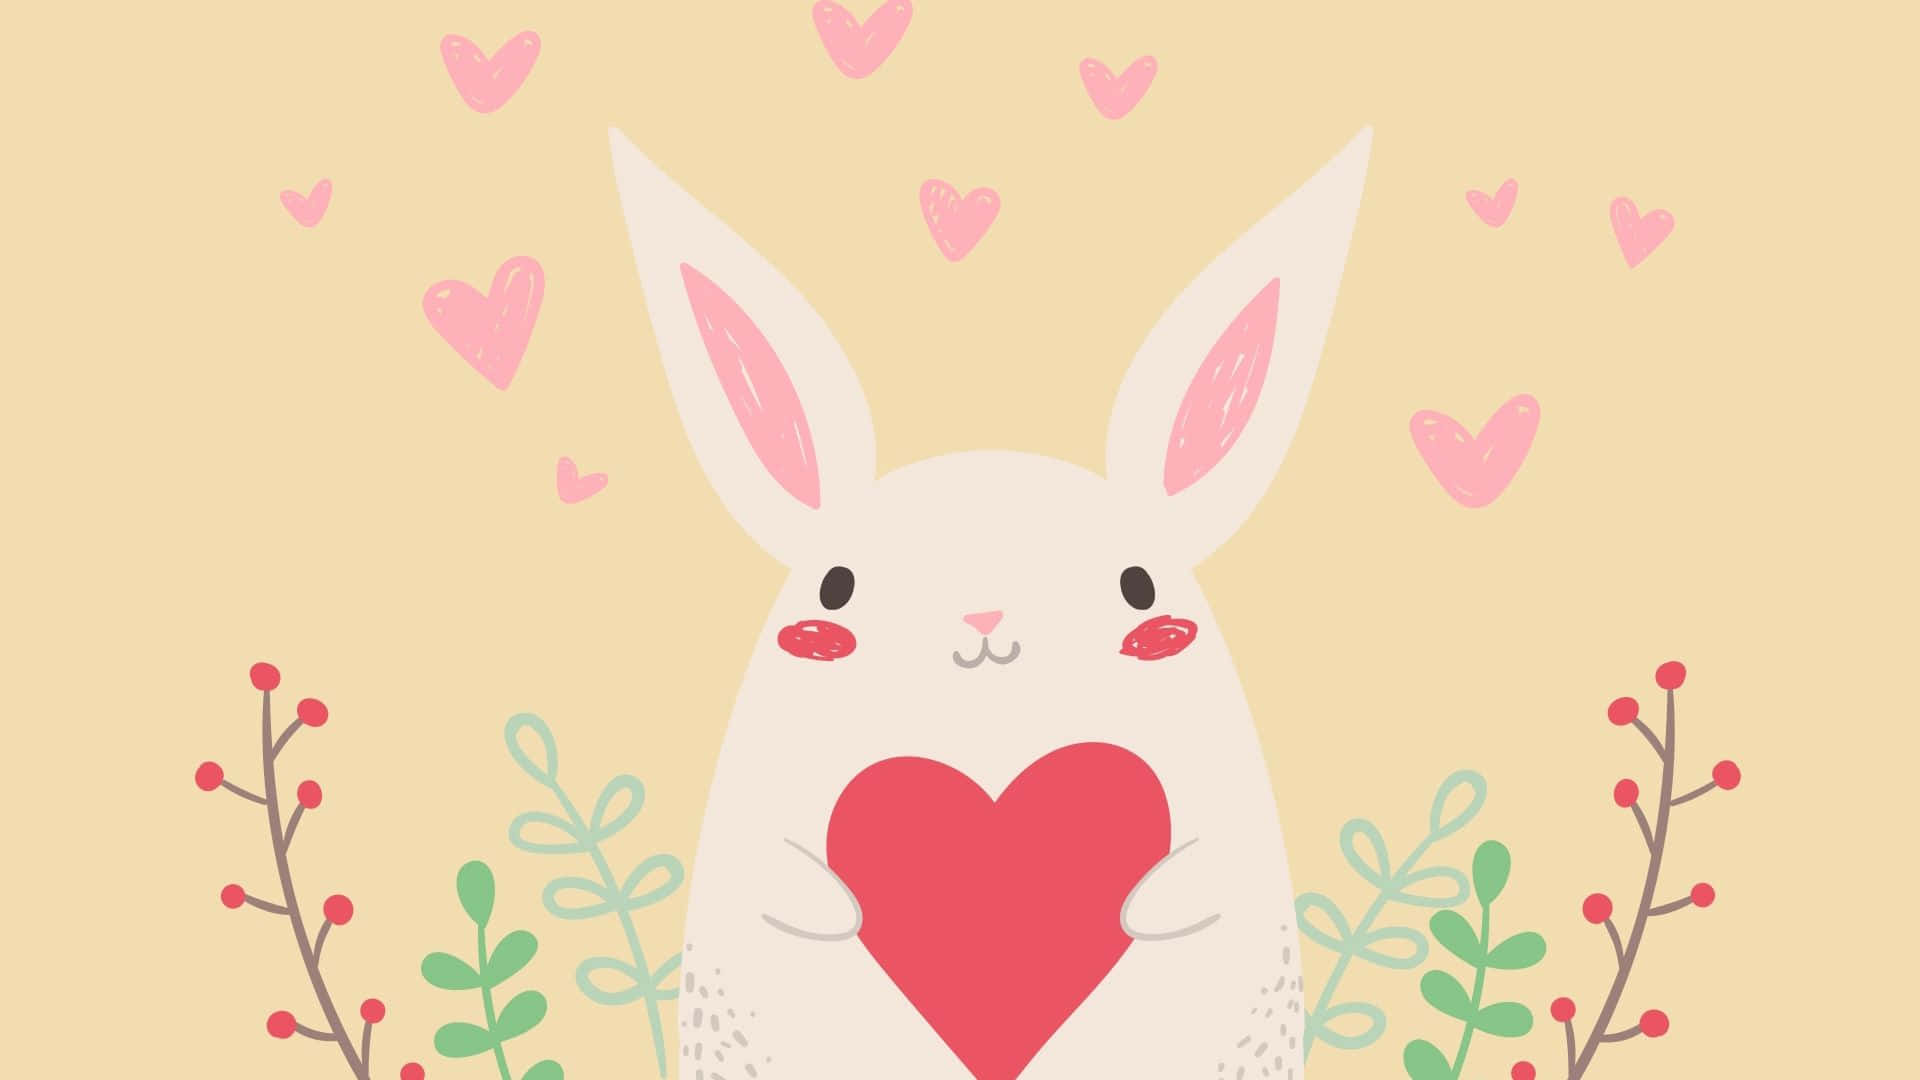 Adorable Bunny With Heart Illustration Wallpaper